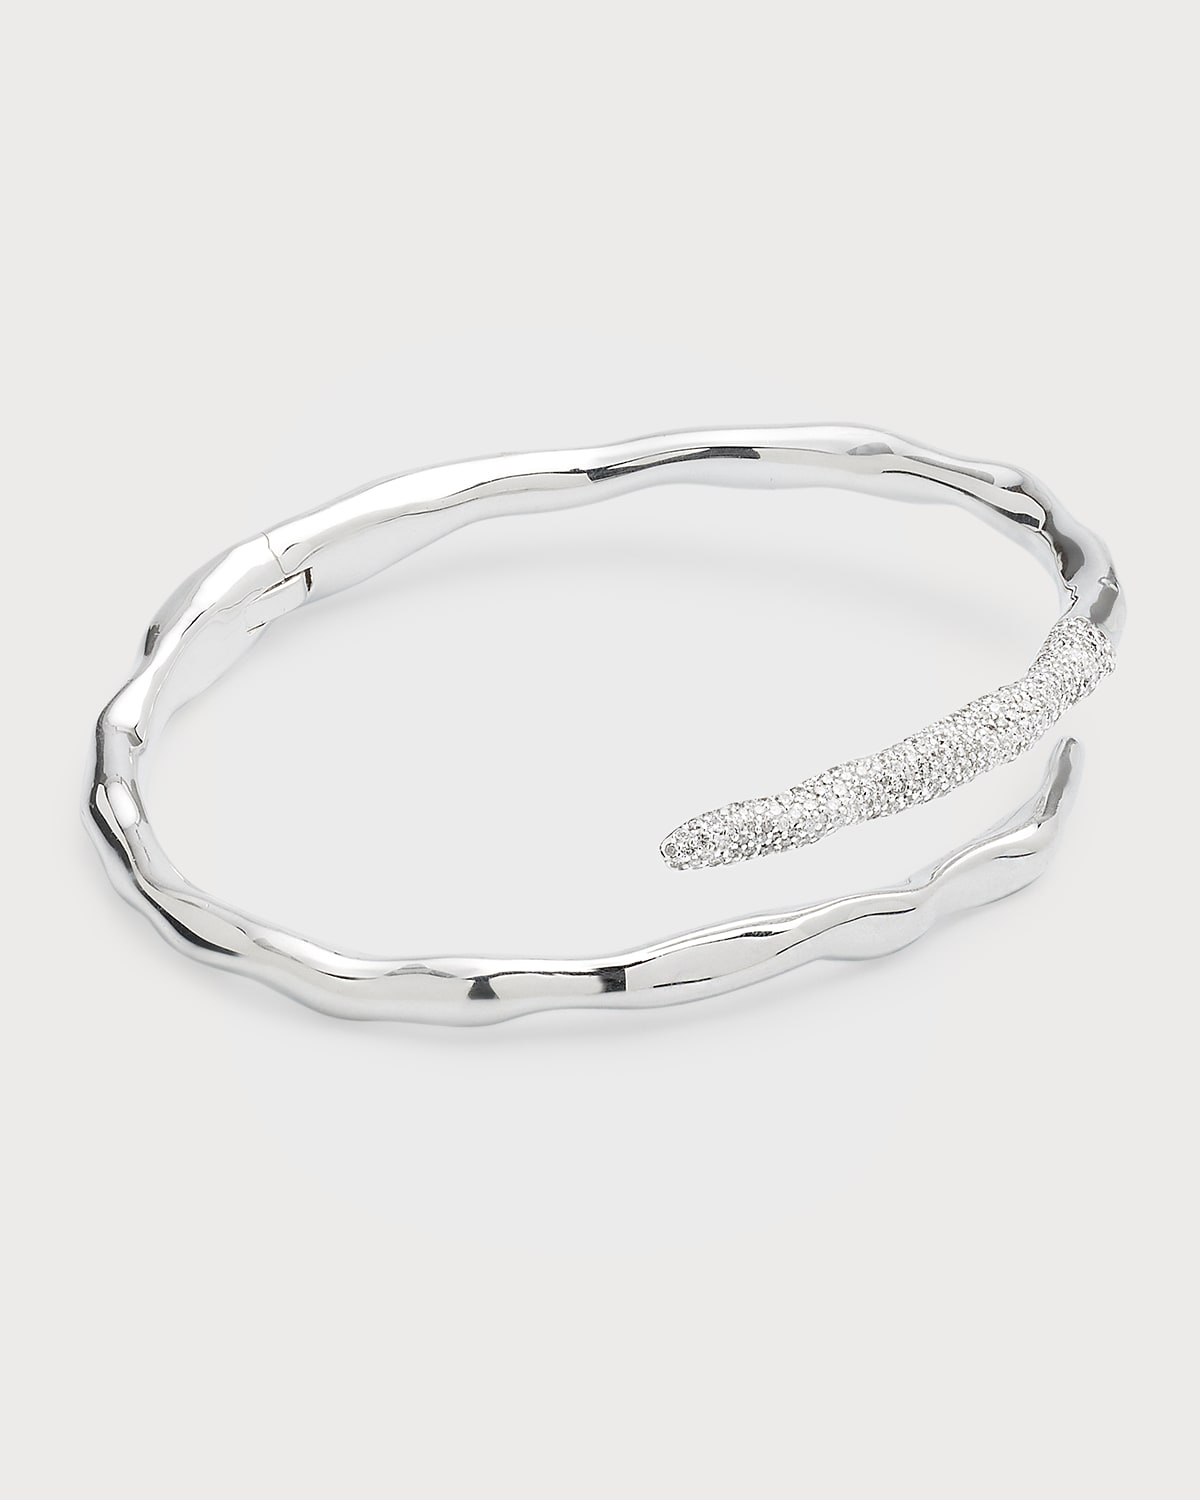 IPPOLITA HINGED BANGLE IN STERLING SILVER WITH DIAMONDS